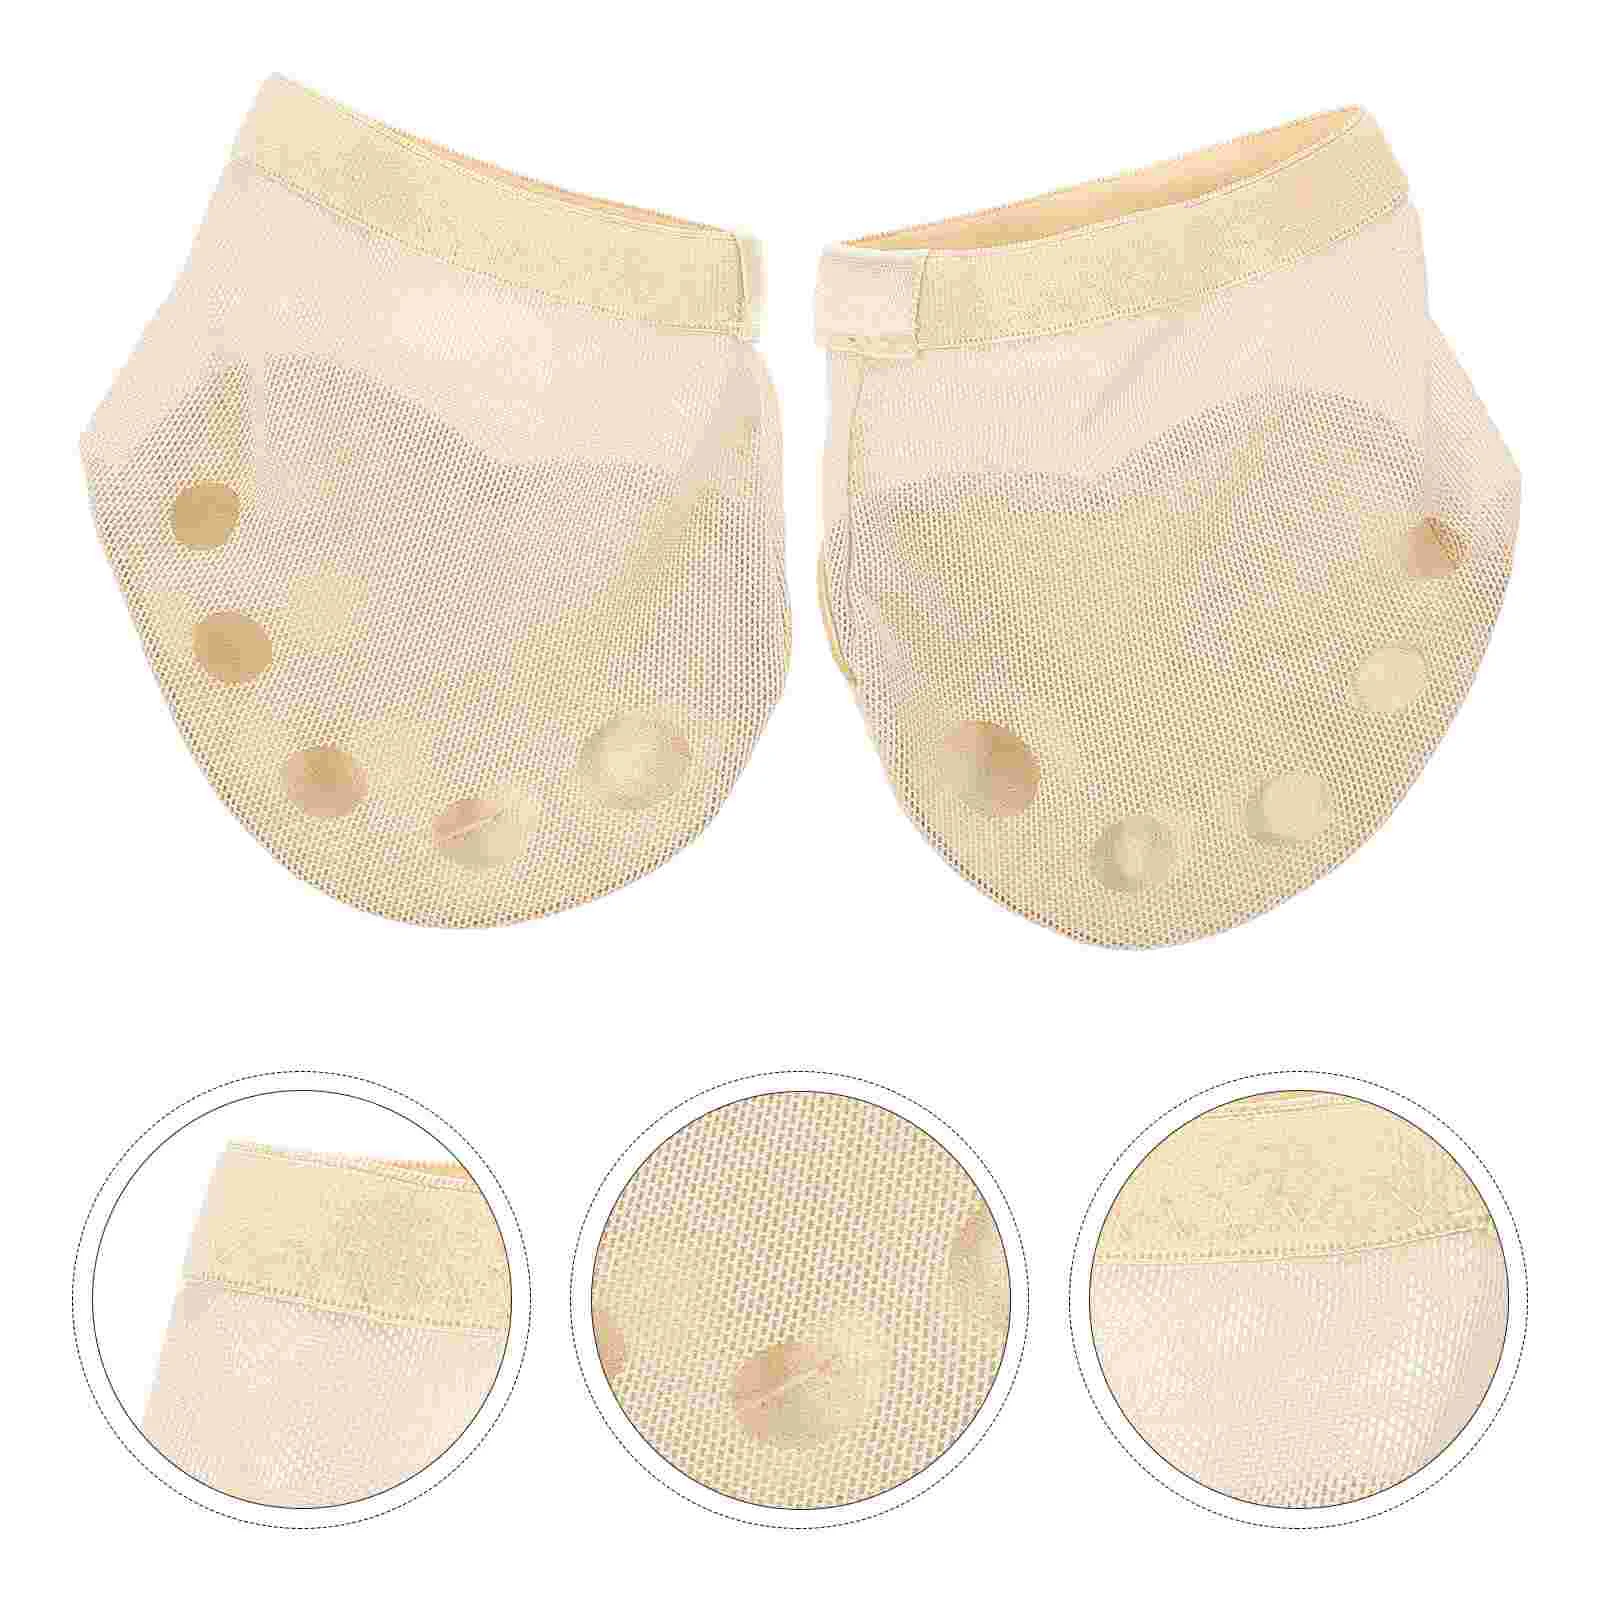 1 Pair Five Holes Half Socks Forefoot Cushion Protective Foot Paw Foot Care Supplies for Ballet Size S tracker sheets money saving office supplies a6 binder cash envelopes cardstock 6 holes budget envelopes cardstock loose leaf